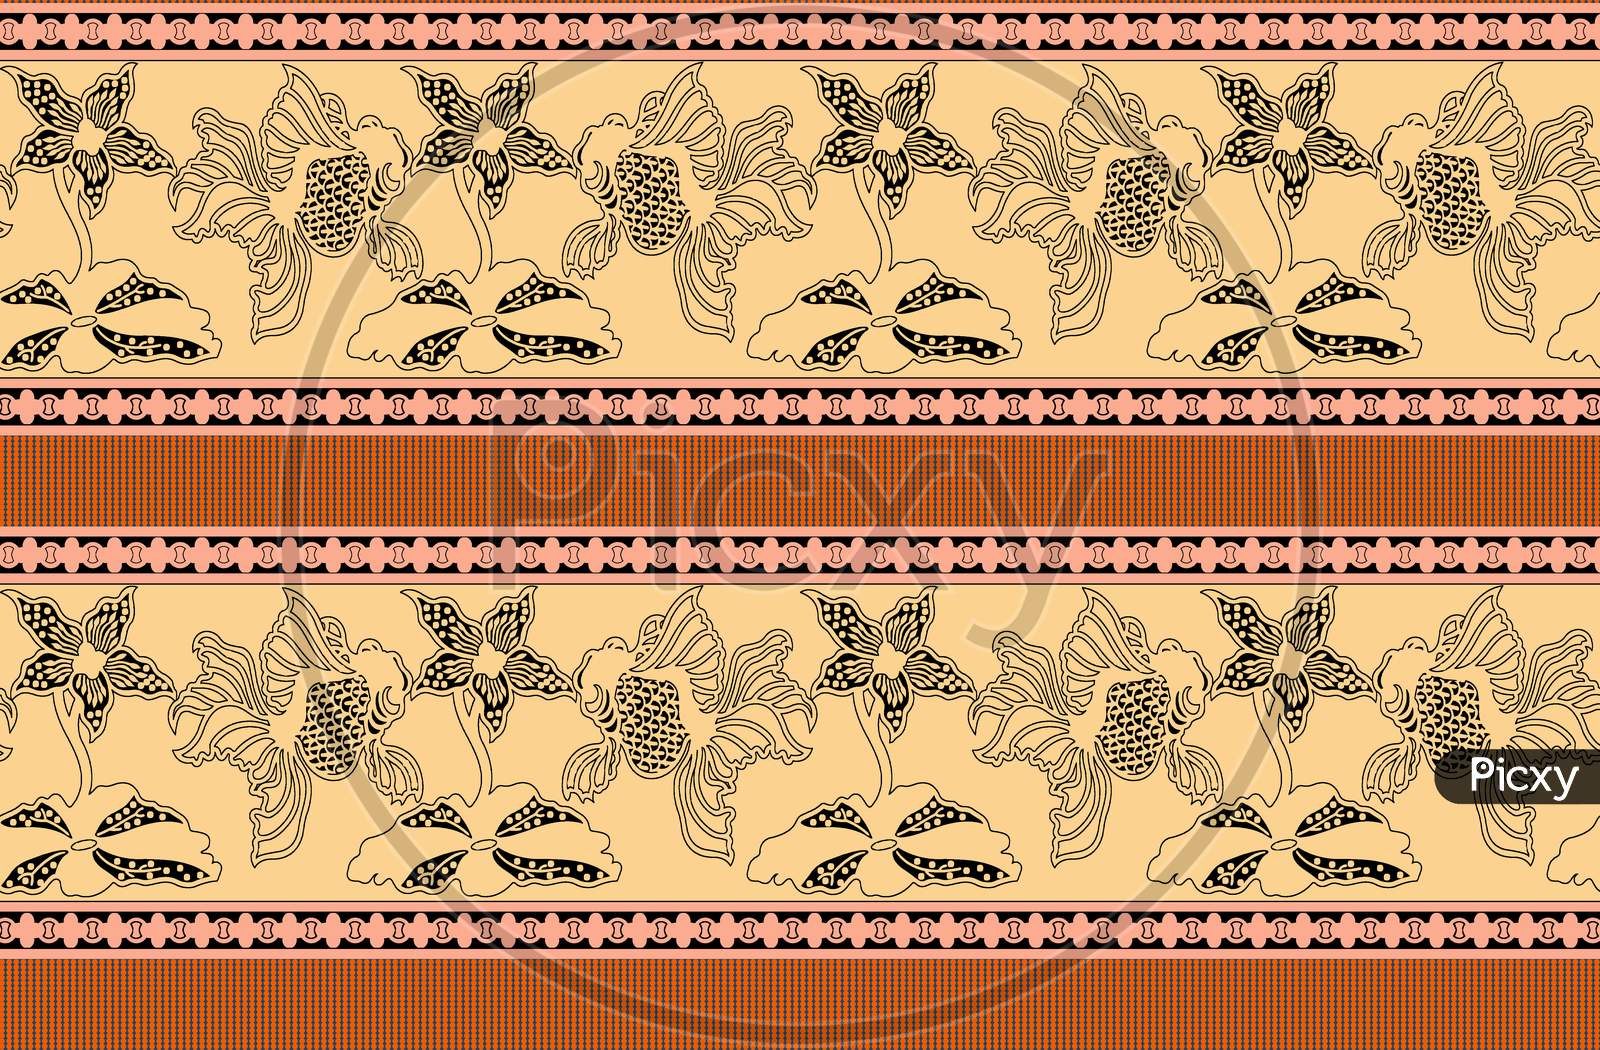 Fish And Flower Boader Seamless Geometric Pattern Background